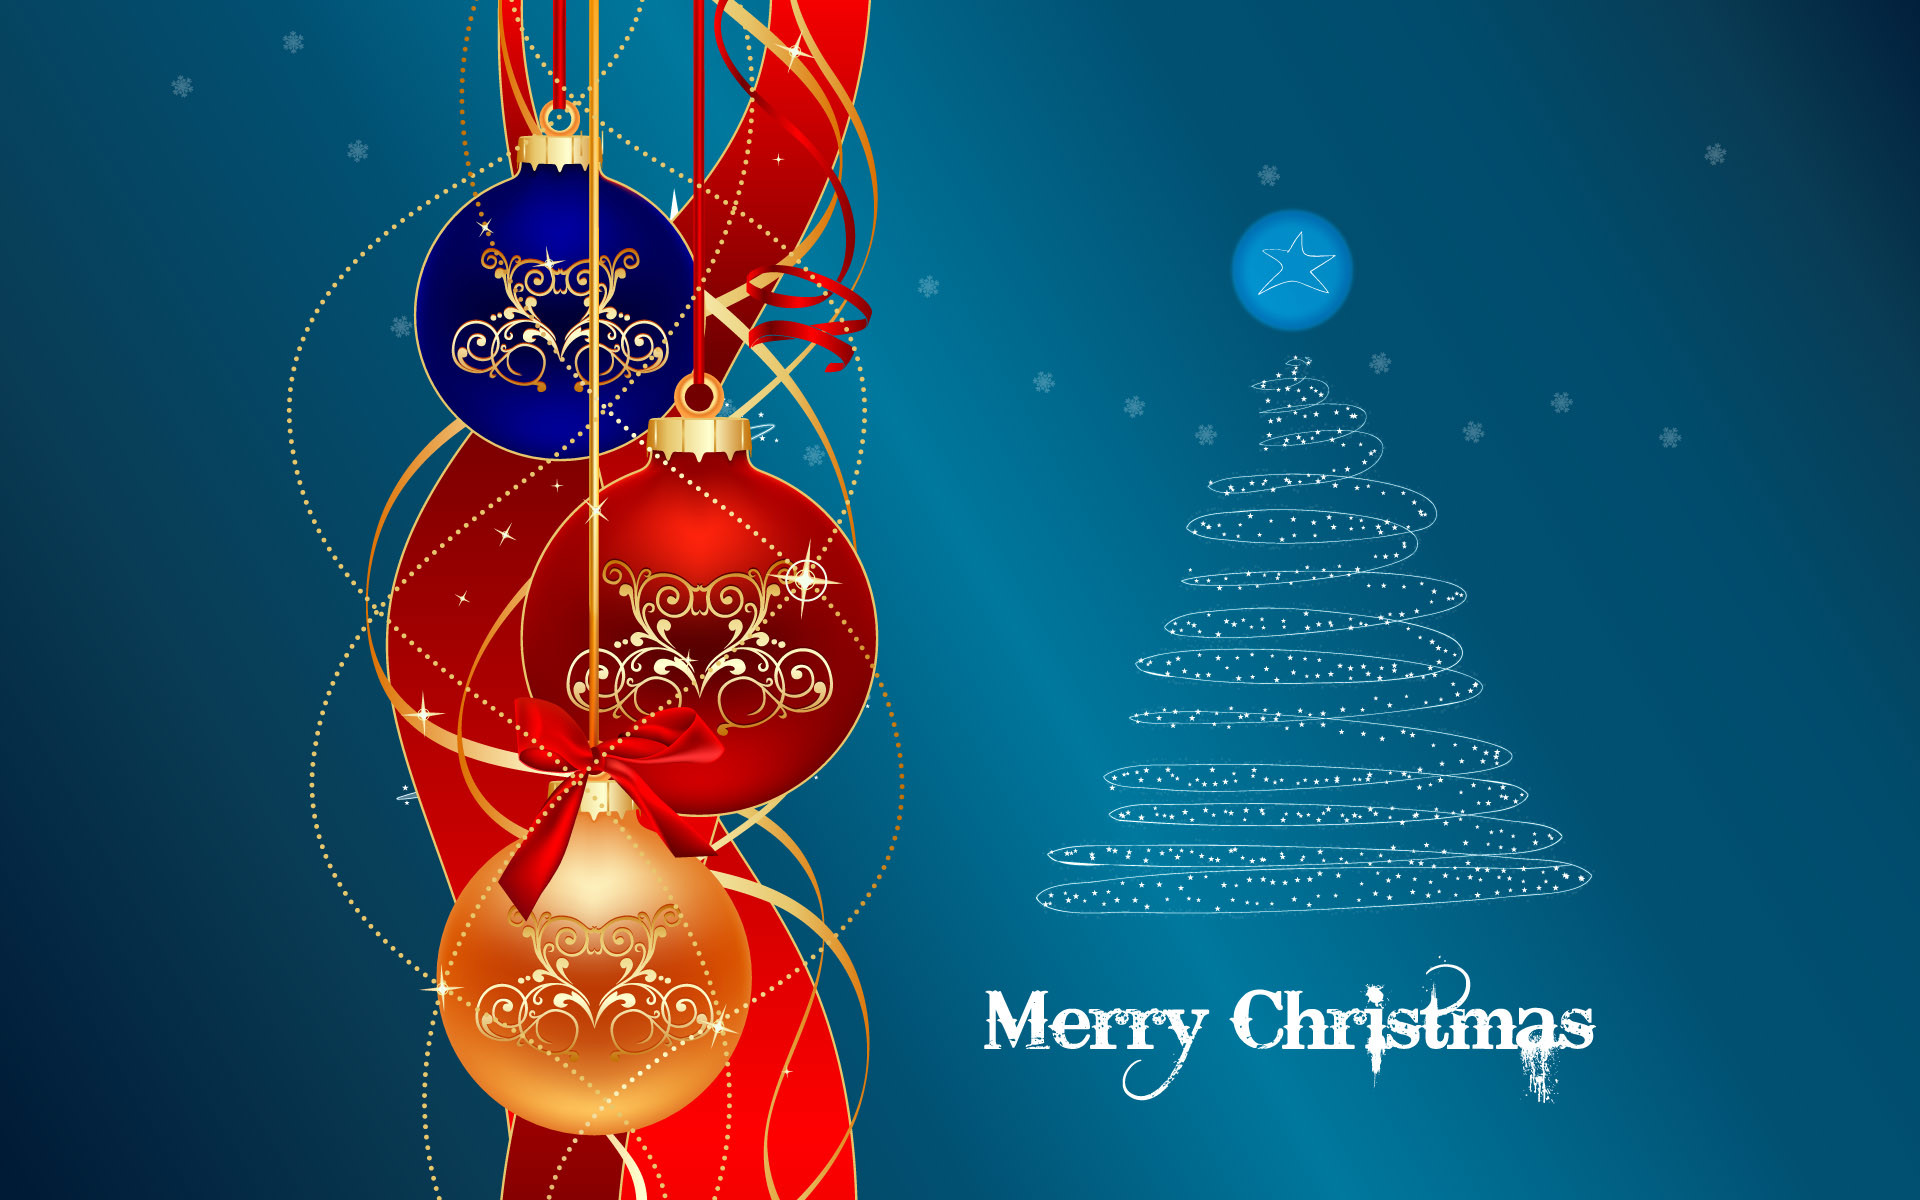 20 Merry Christmas Images & Wallpapers